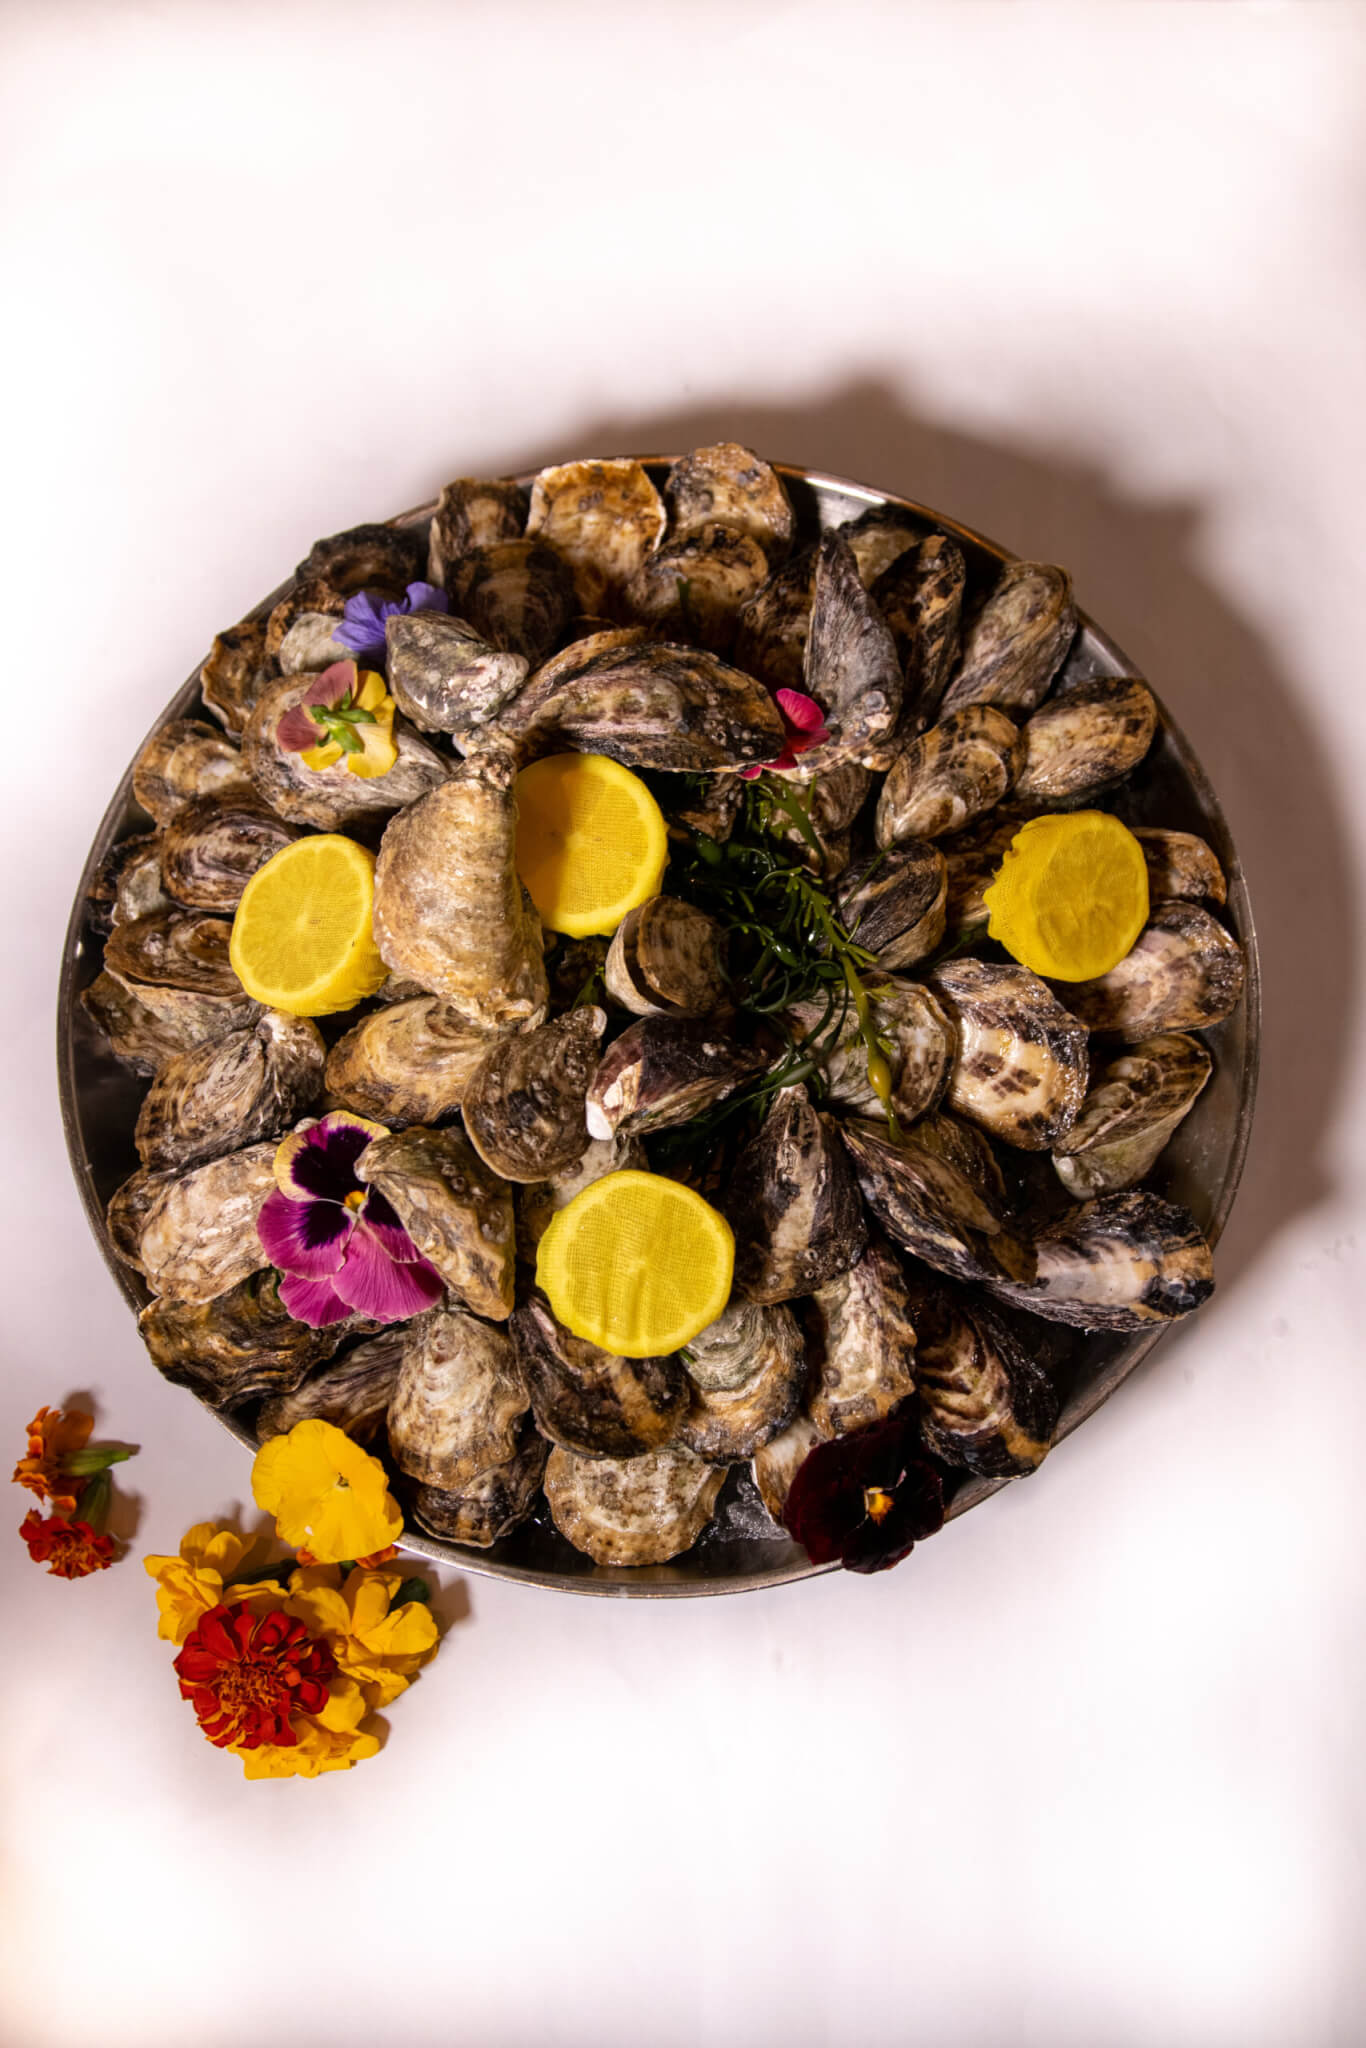 LAVO Las Vegas - Oysters on the Half Shell